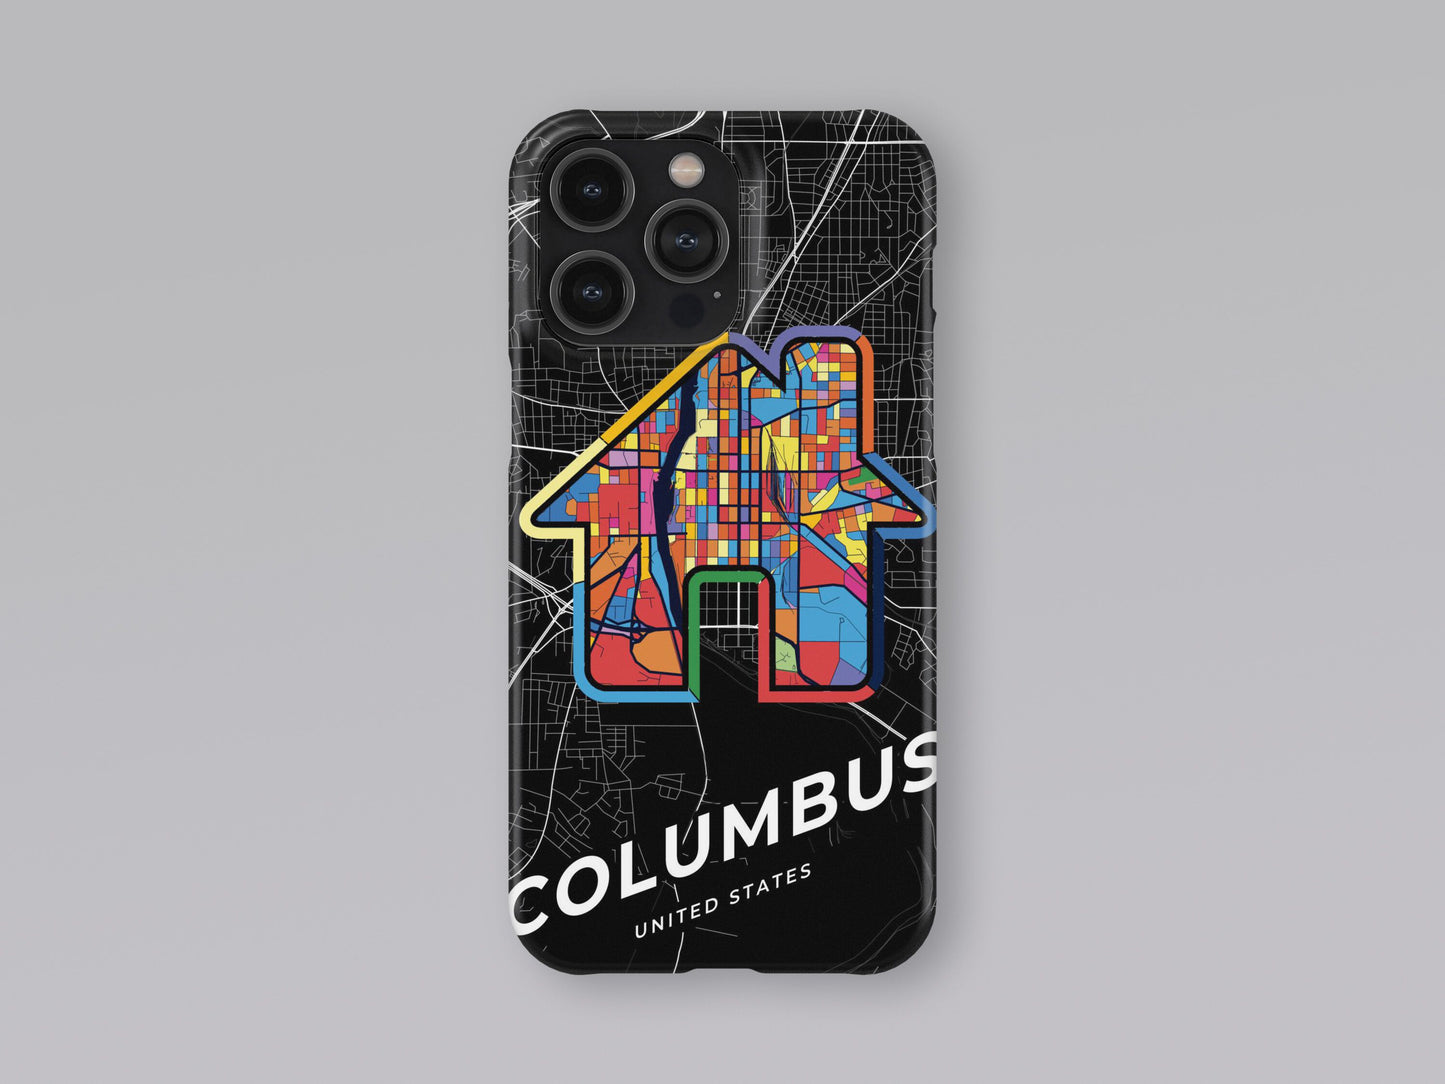 Columbus Georgia slim phone case with colorful icon. Birthday, wedding or housewarming gift. Couple match cases. 3